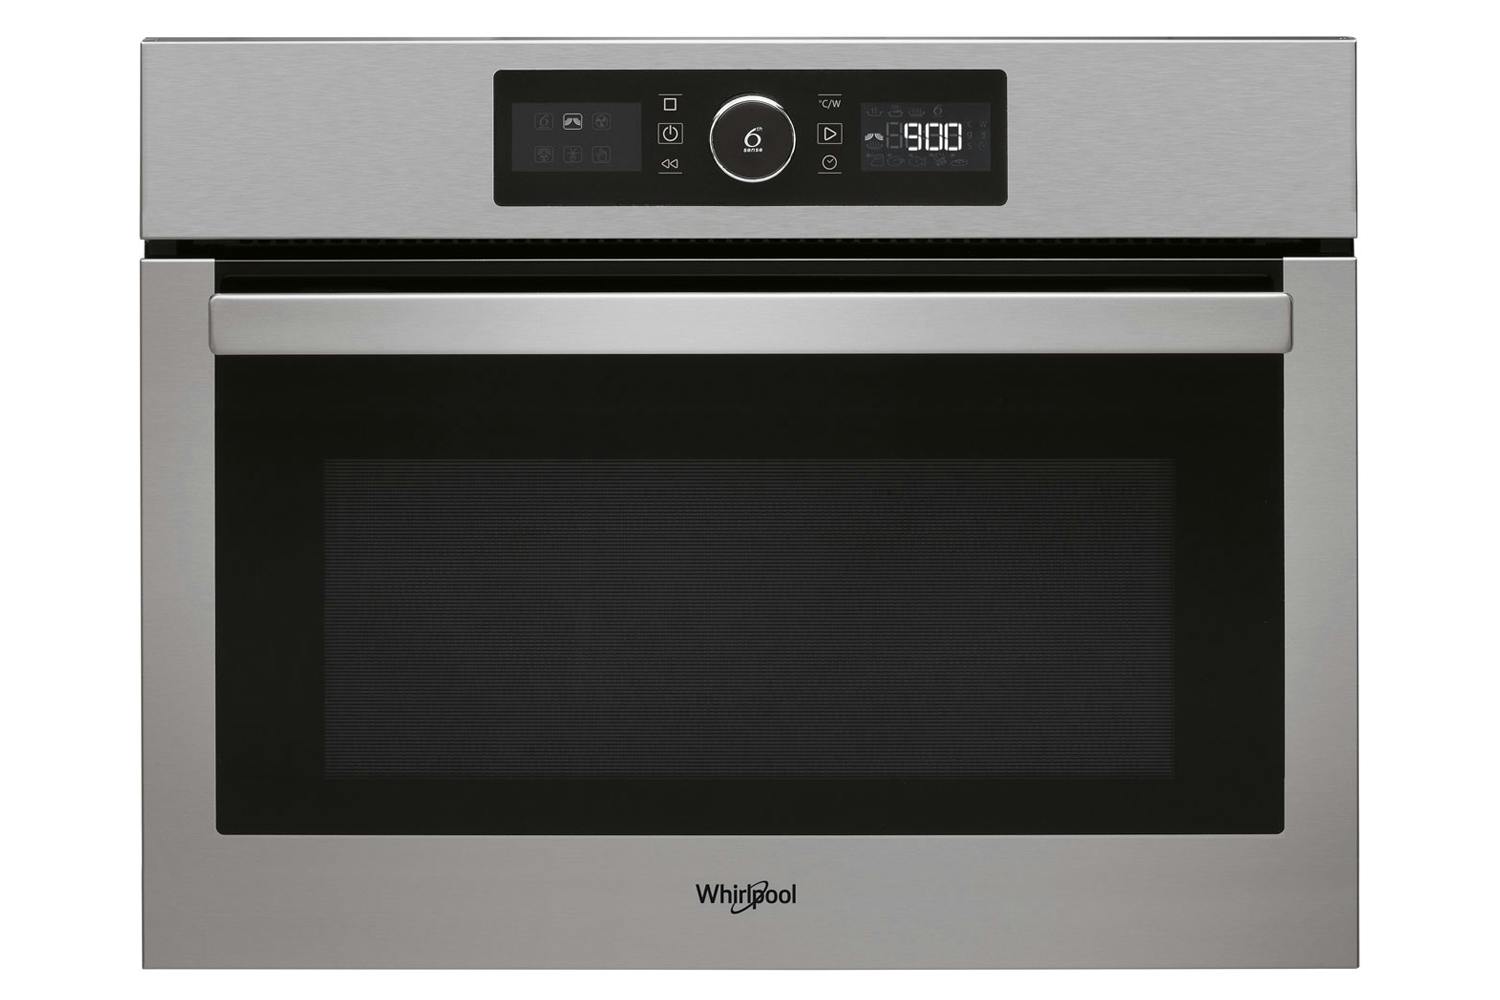 Whirlpool 40L 900W Built-in Microwave Oven | AMW9615/IXUK | Stainless Steel